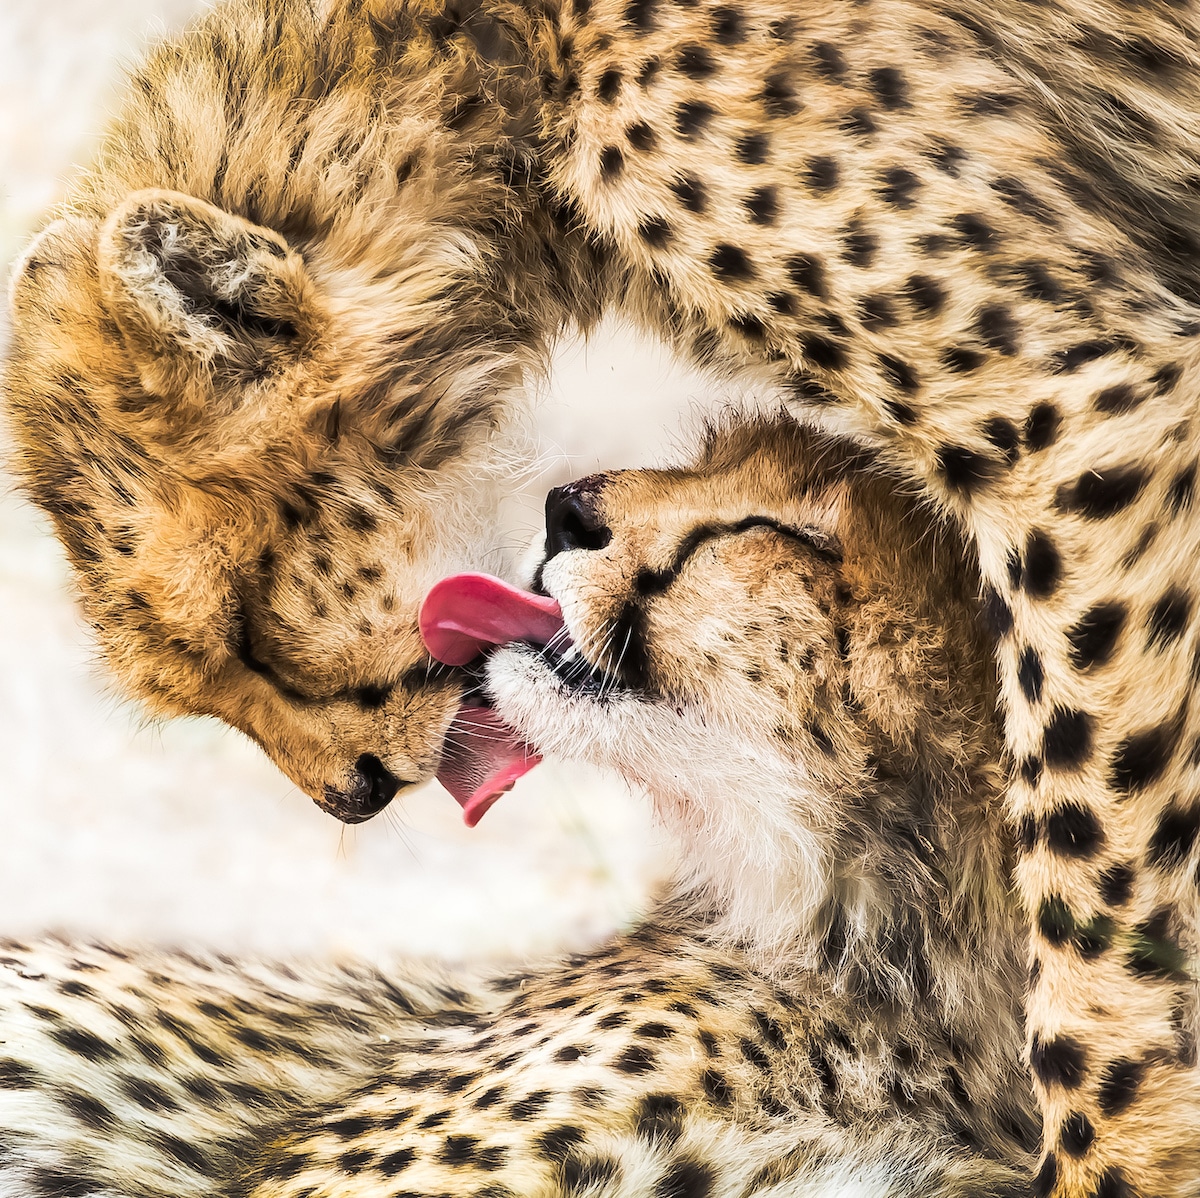 Cheetahs Licking Each Other's Faces